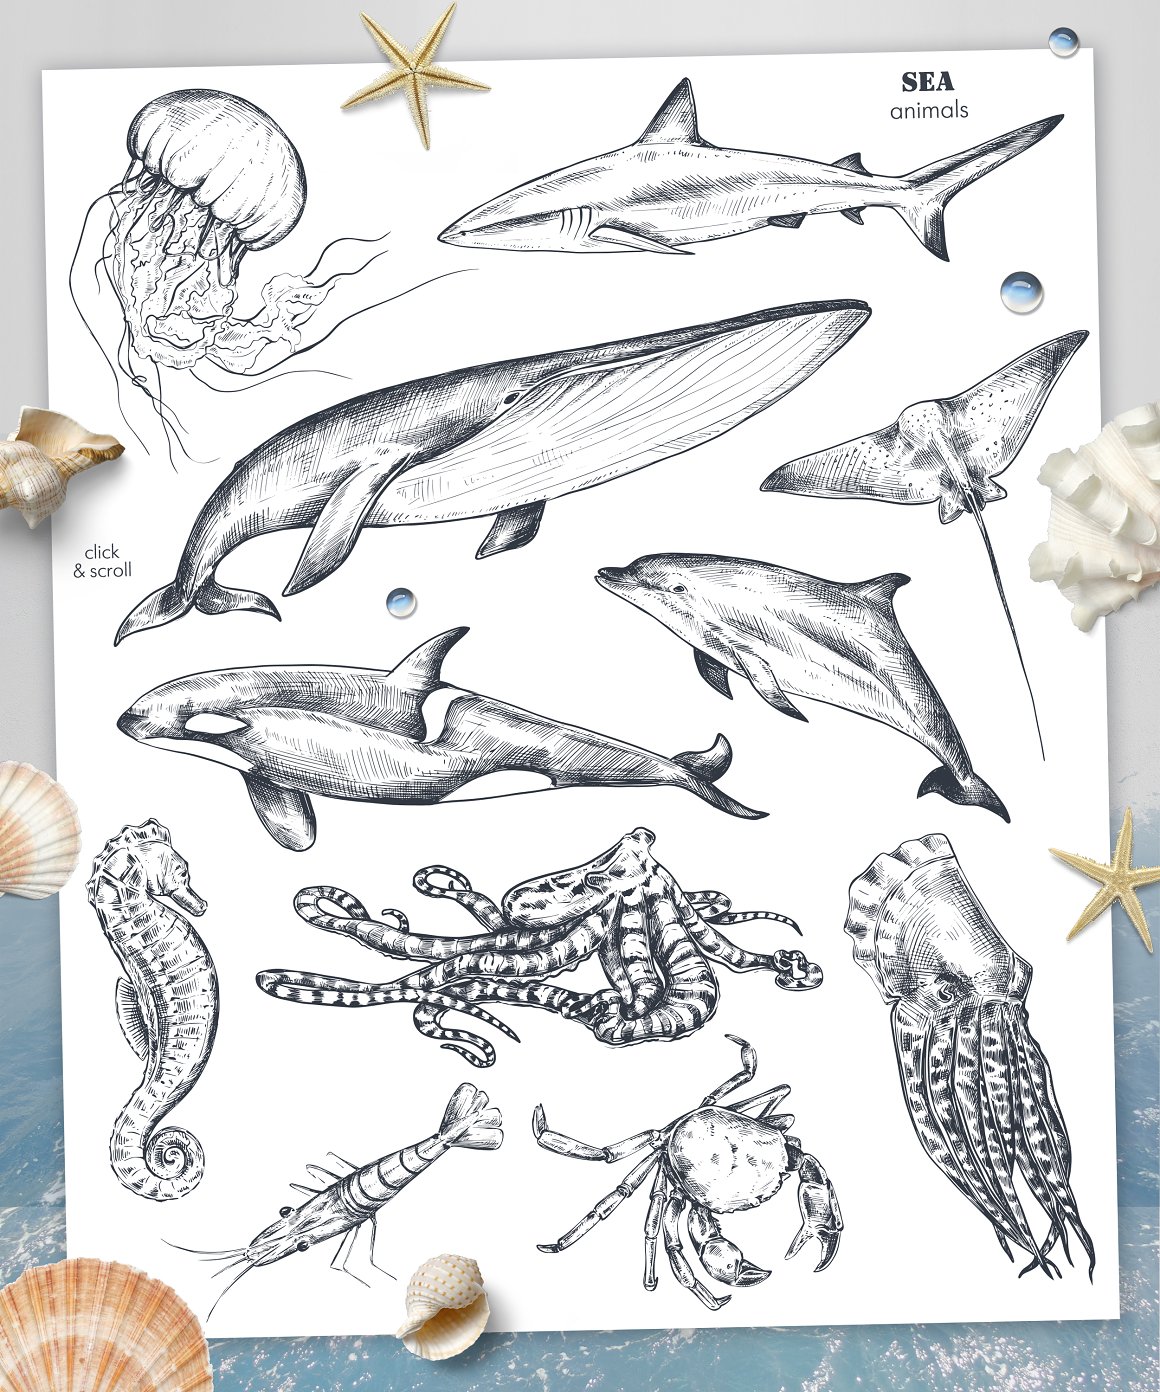 Sea animals and others.